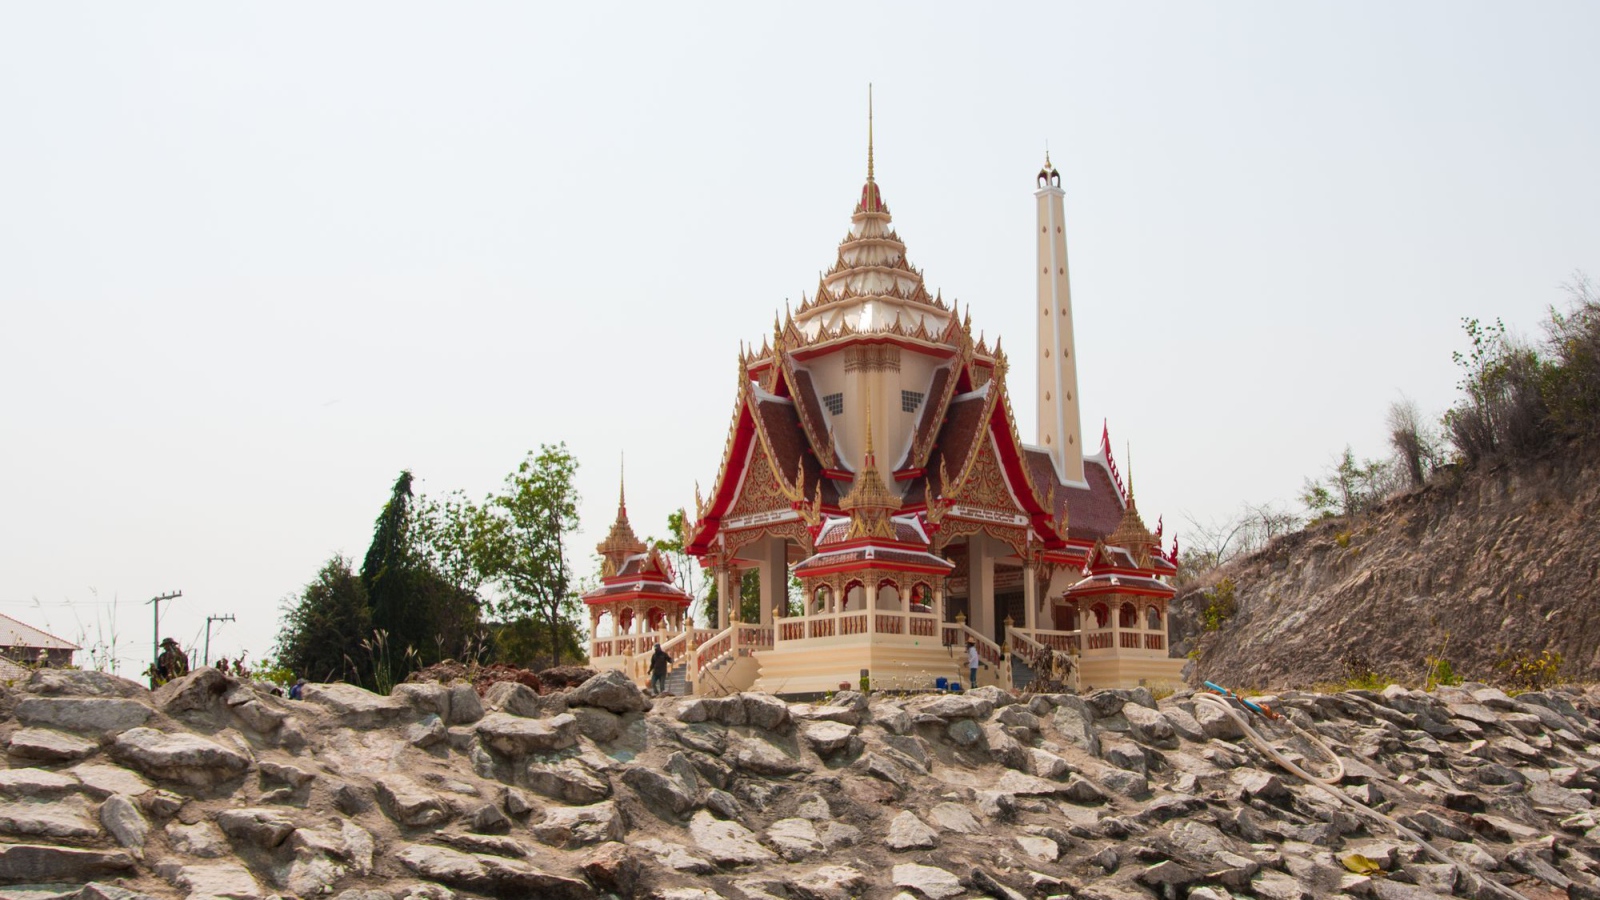 Temple on the coast in the resort of Hua Hin, Thailand